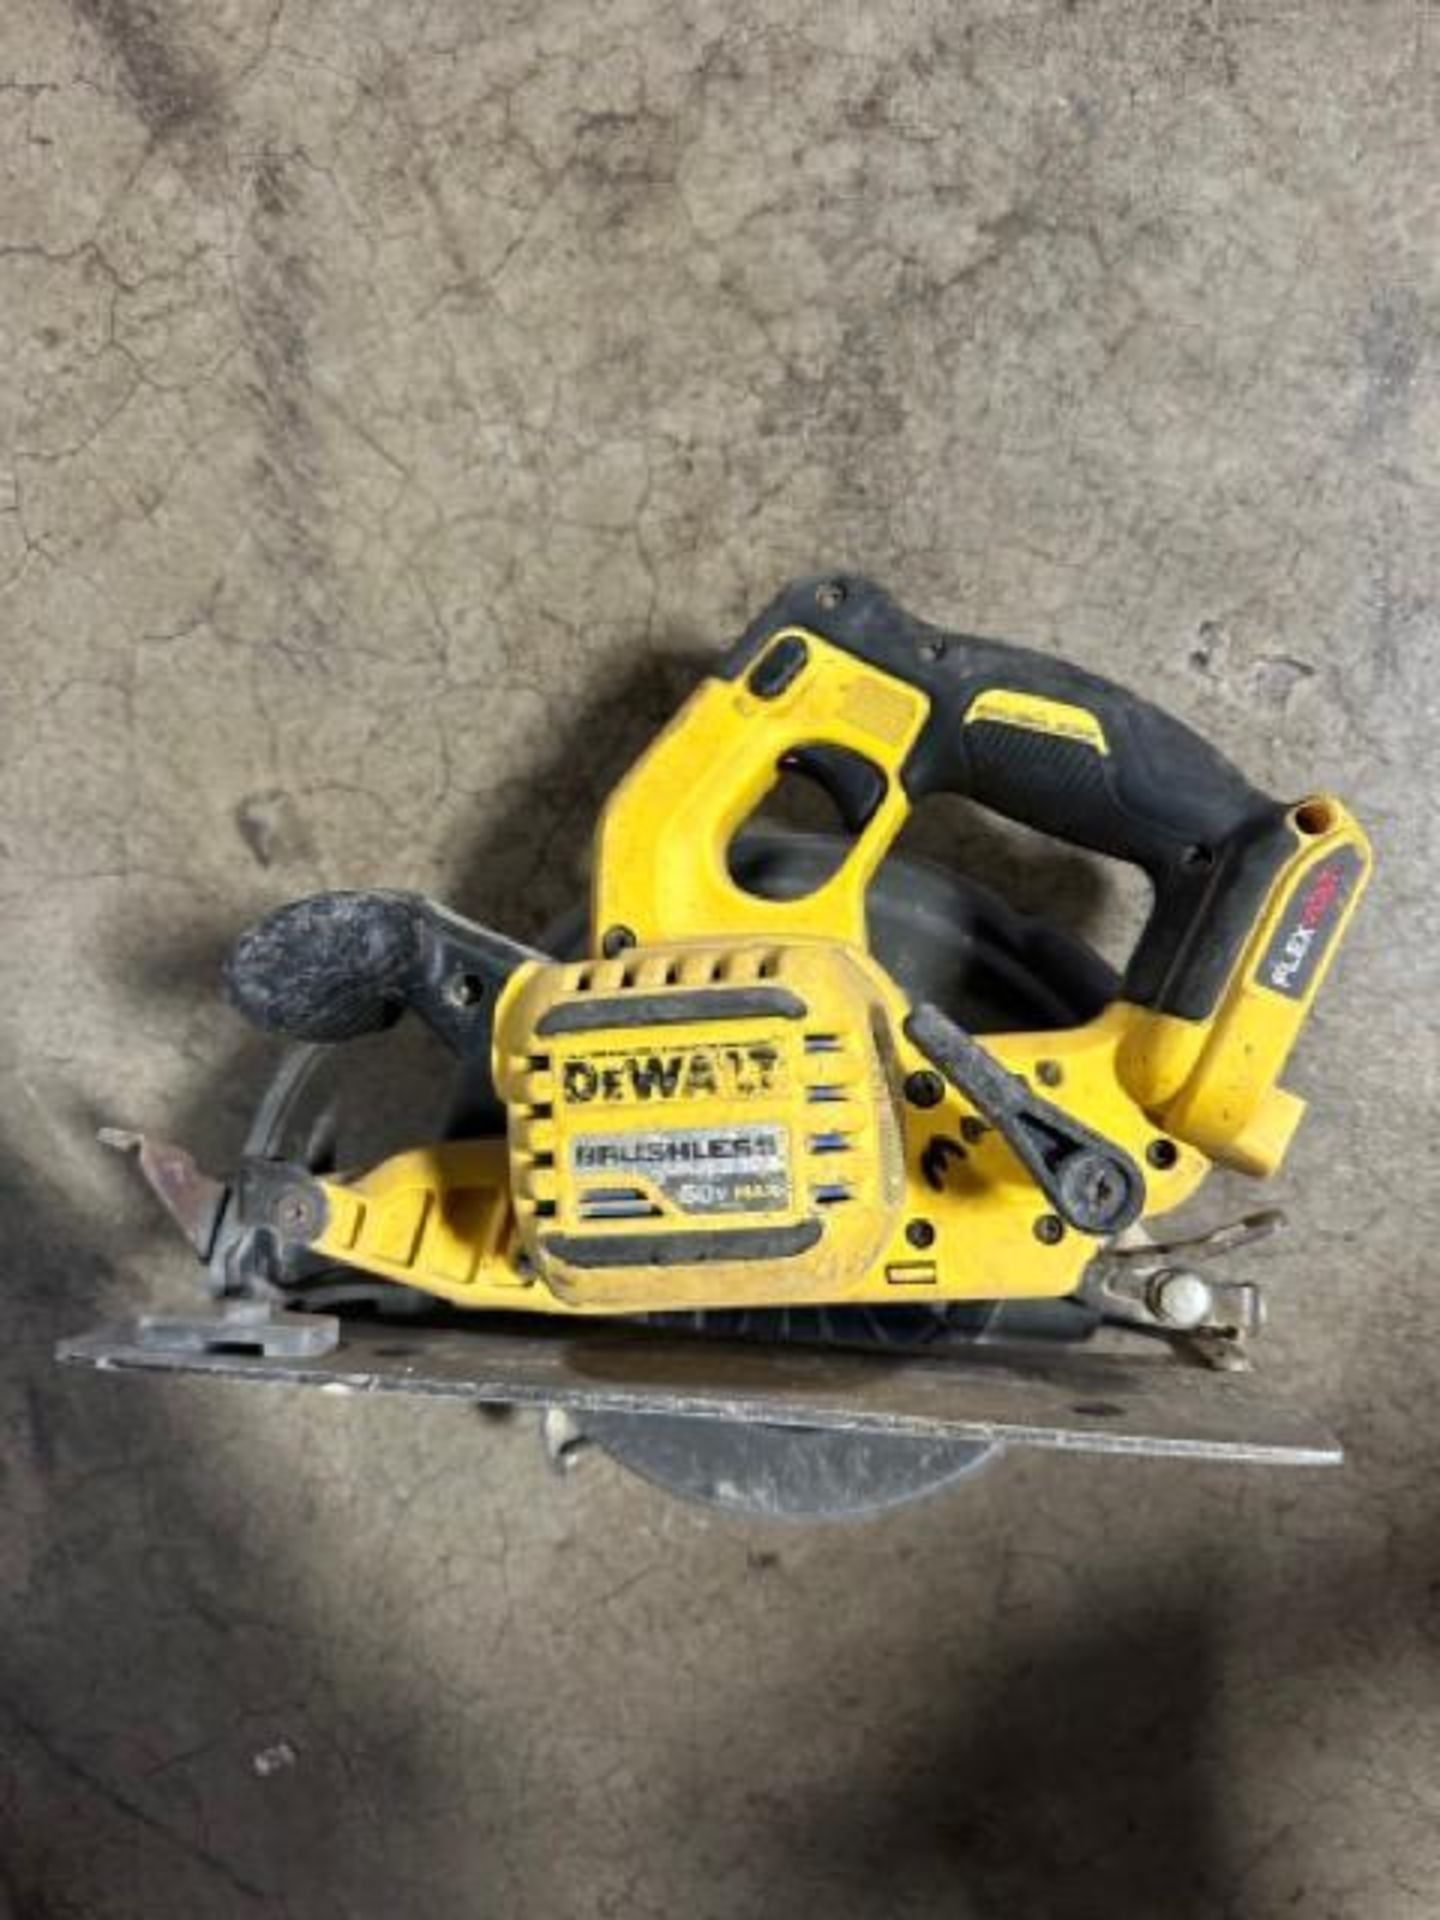 DeWalt DCS575 7-1/4" cordless circular saw with bag and charger, battery not included - Image 2 of 4